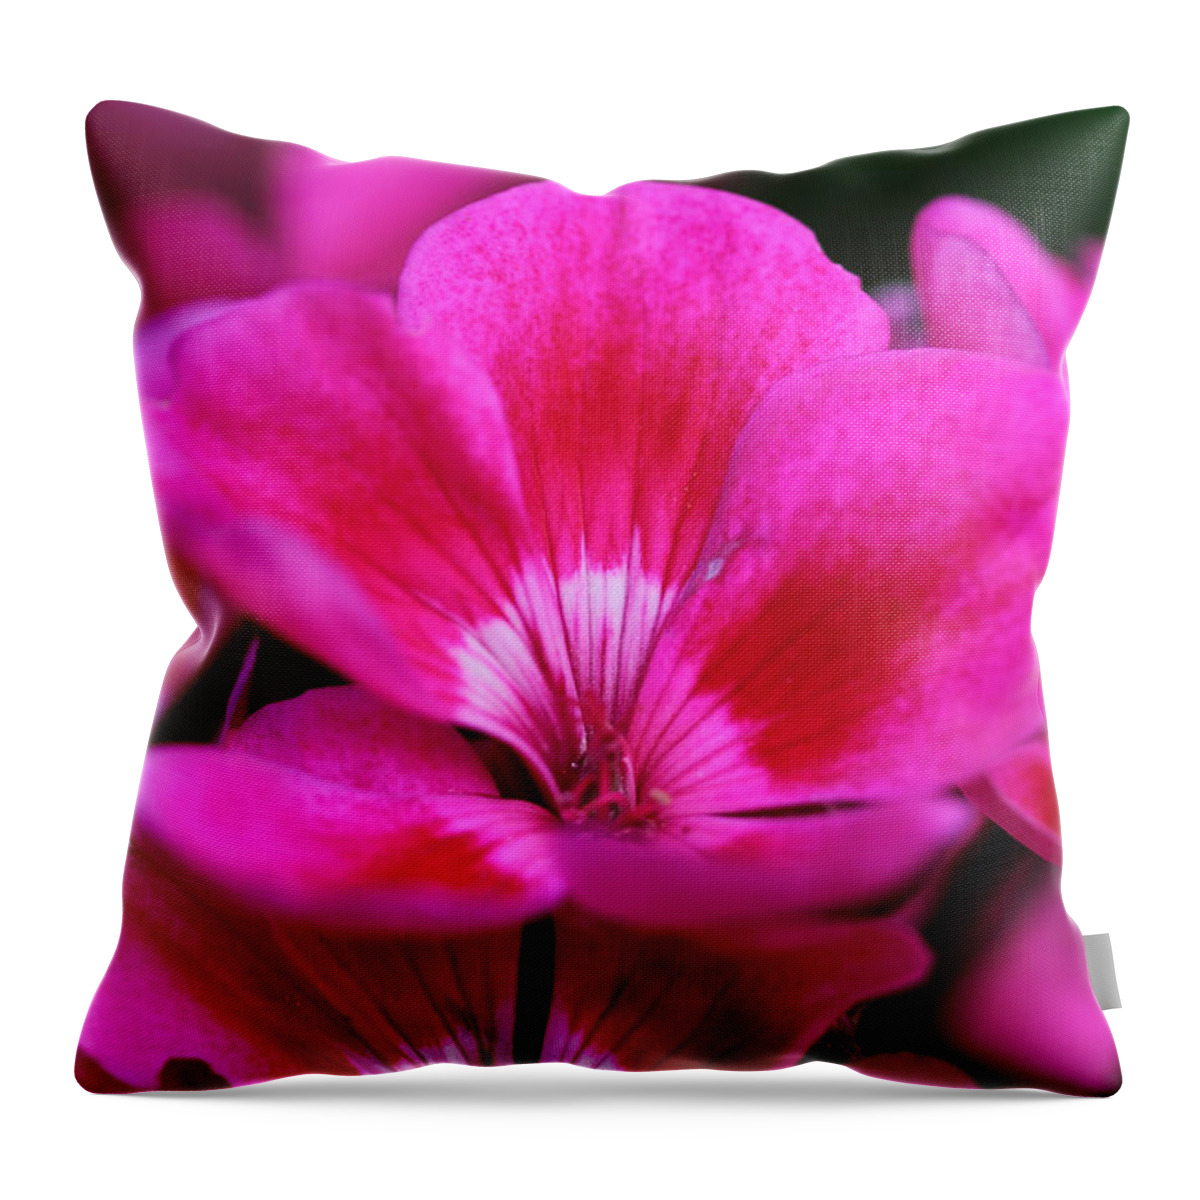 Pink Flowers Throw Pillow featuring the photograph Vibrant Pink Flowers by Angela Murdock